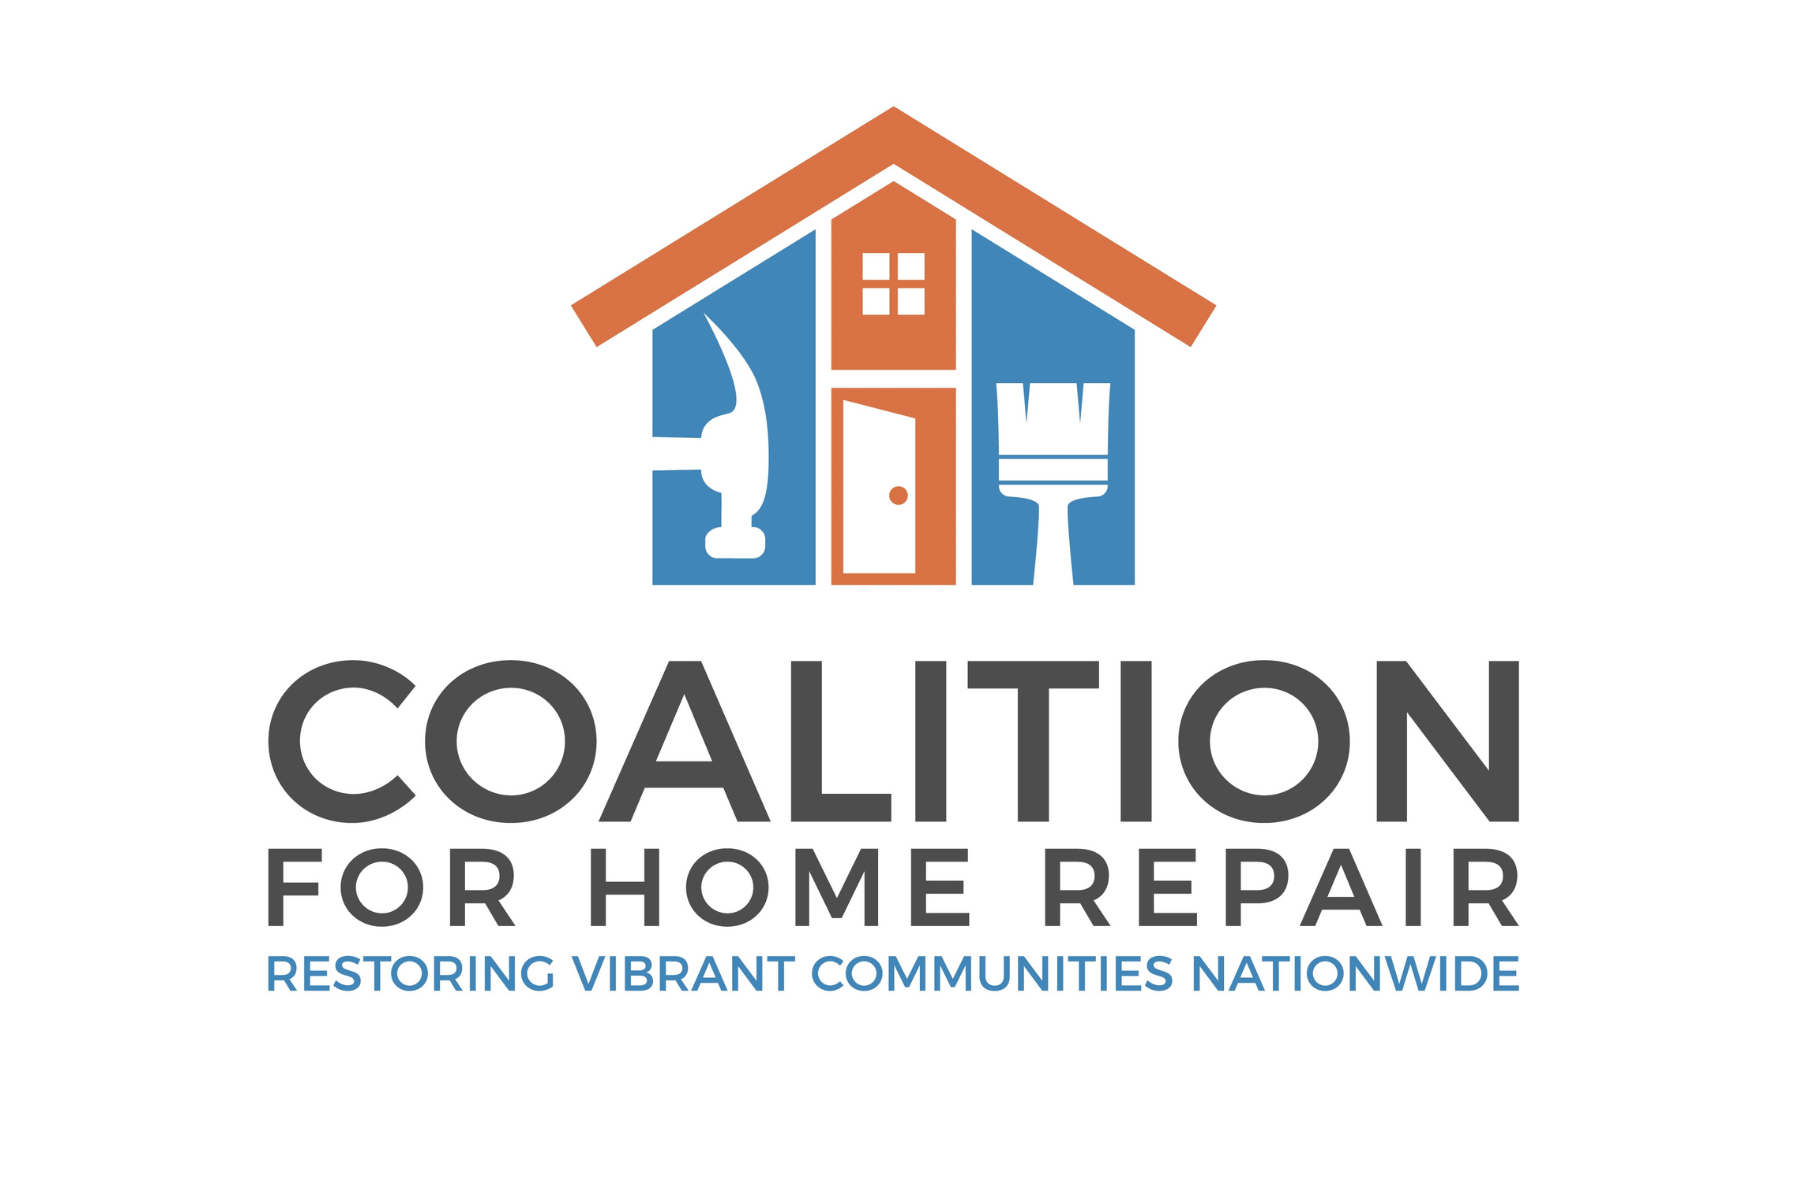 Coalition for Home Repair